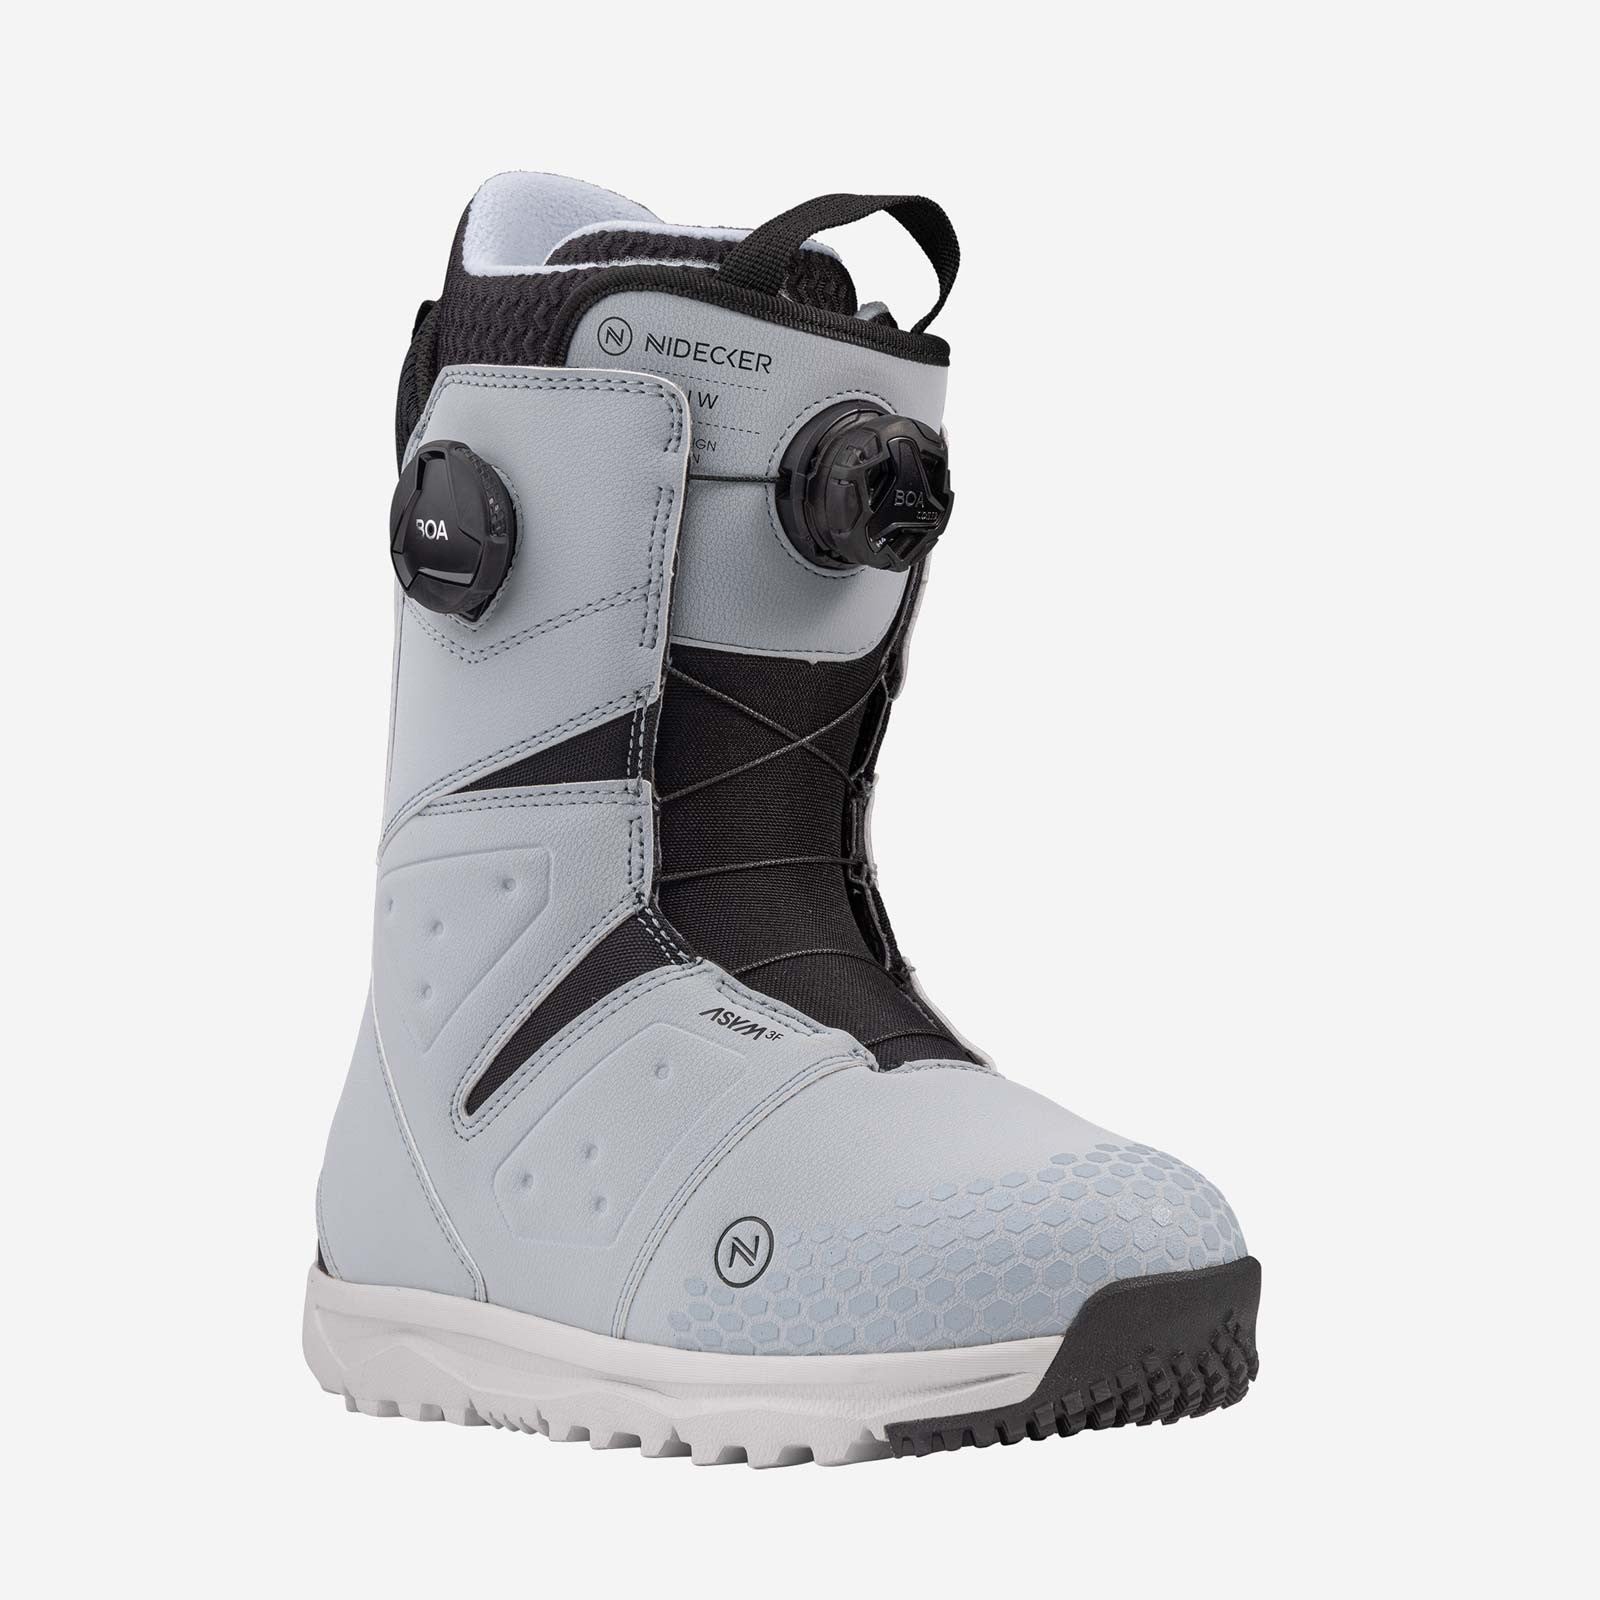 The Altai-W is the centrepiece of our new women’s boot collection, offering premium features and freeride-friendly support at an unbeatable price. It’s built around an asymmetrical upper that fits perfectly with Nidecker and Flow binding straps, eliminating pressure points. 